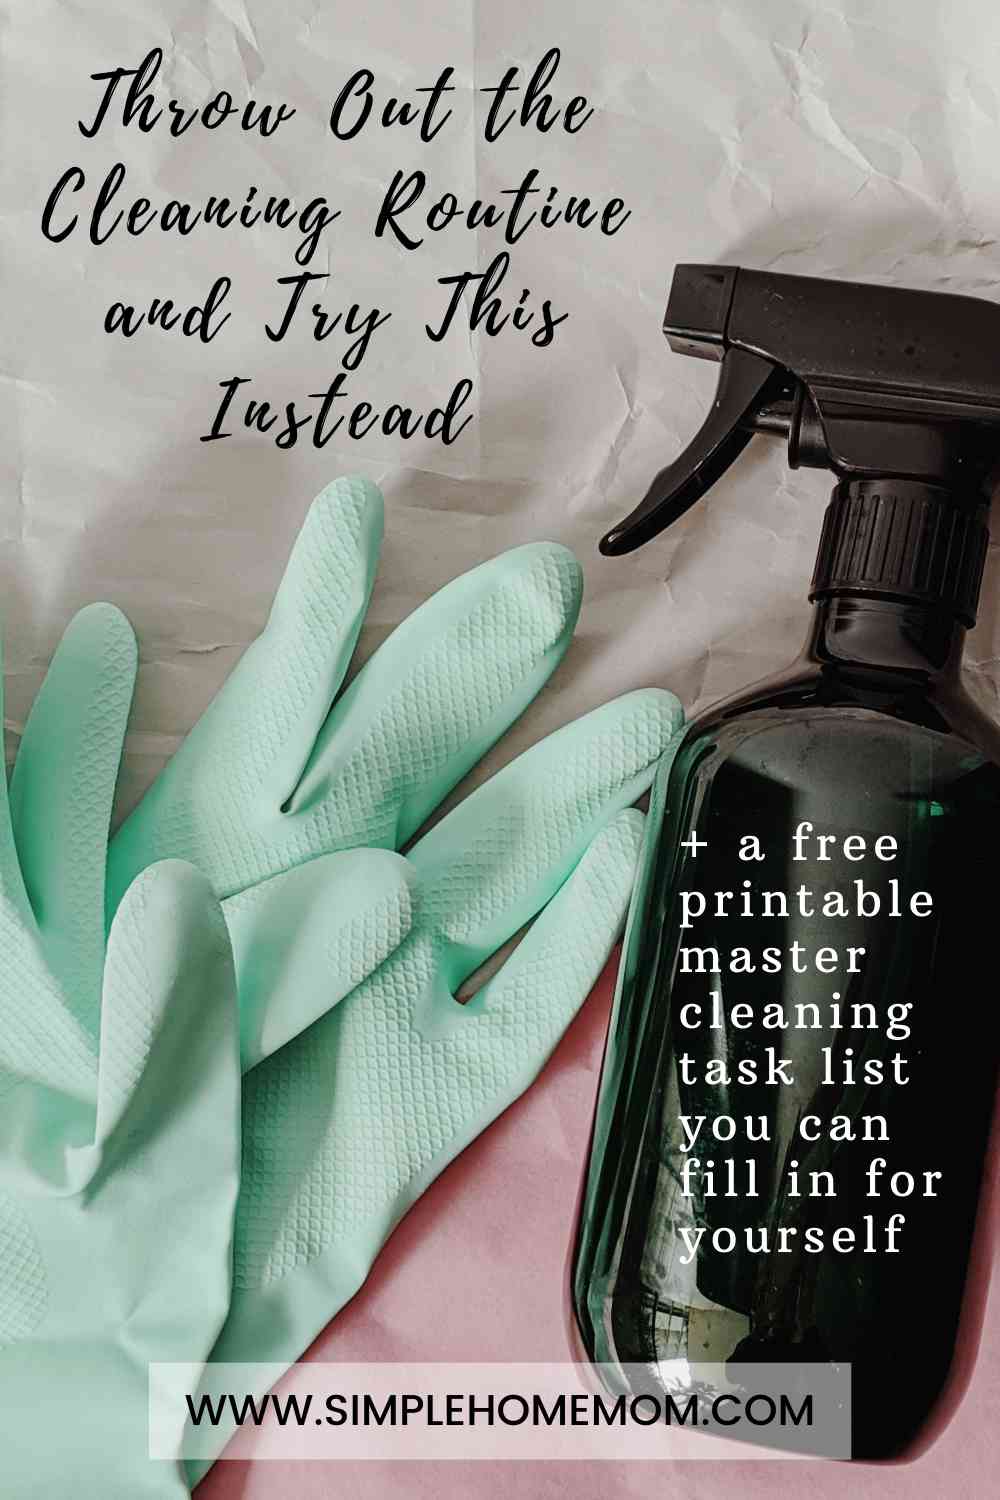 Cleaning supplies on a table with gloves.